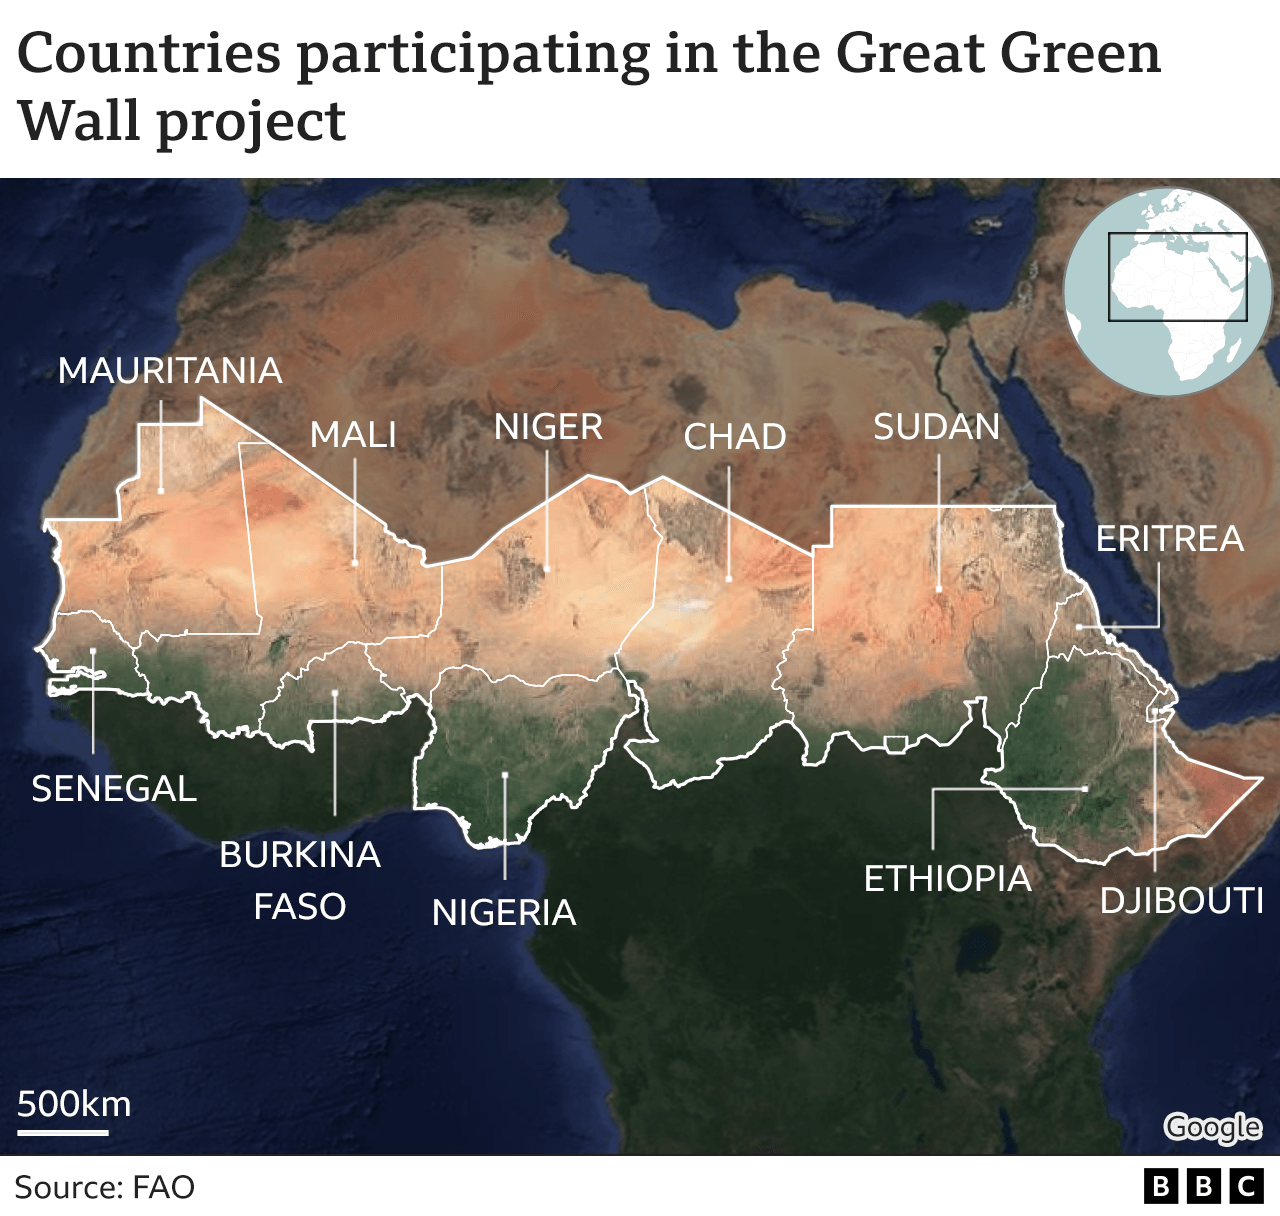 Satellite picture of Africa showing 11 countries taking part in the Great Green Wall